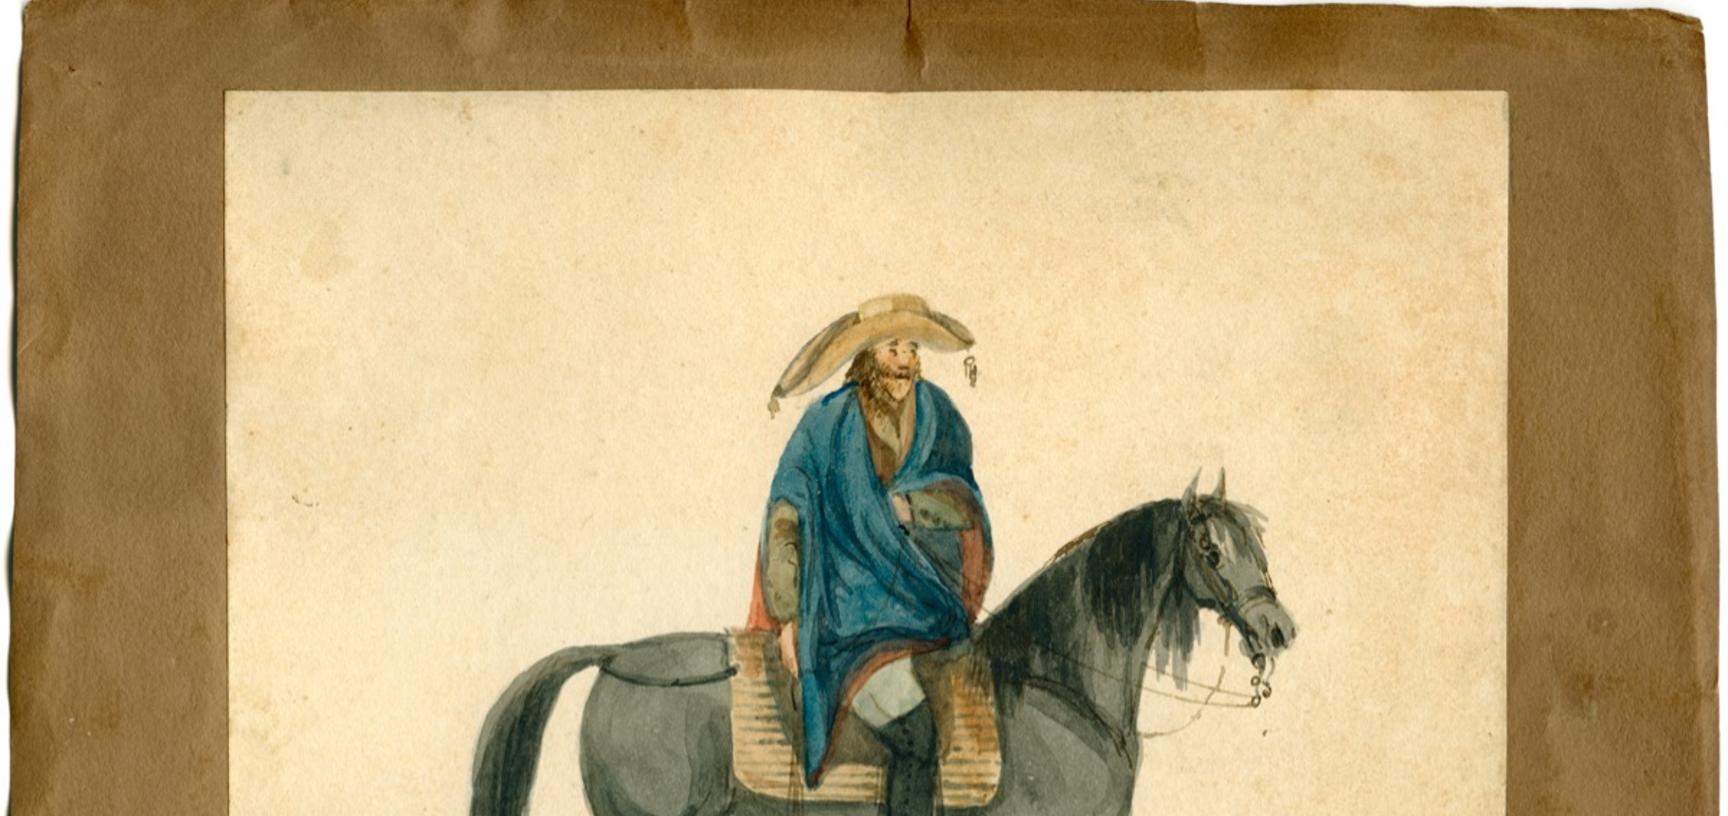 A mounted muleteer, one of a series of Brazilian types from Rio de Janeiro.